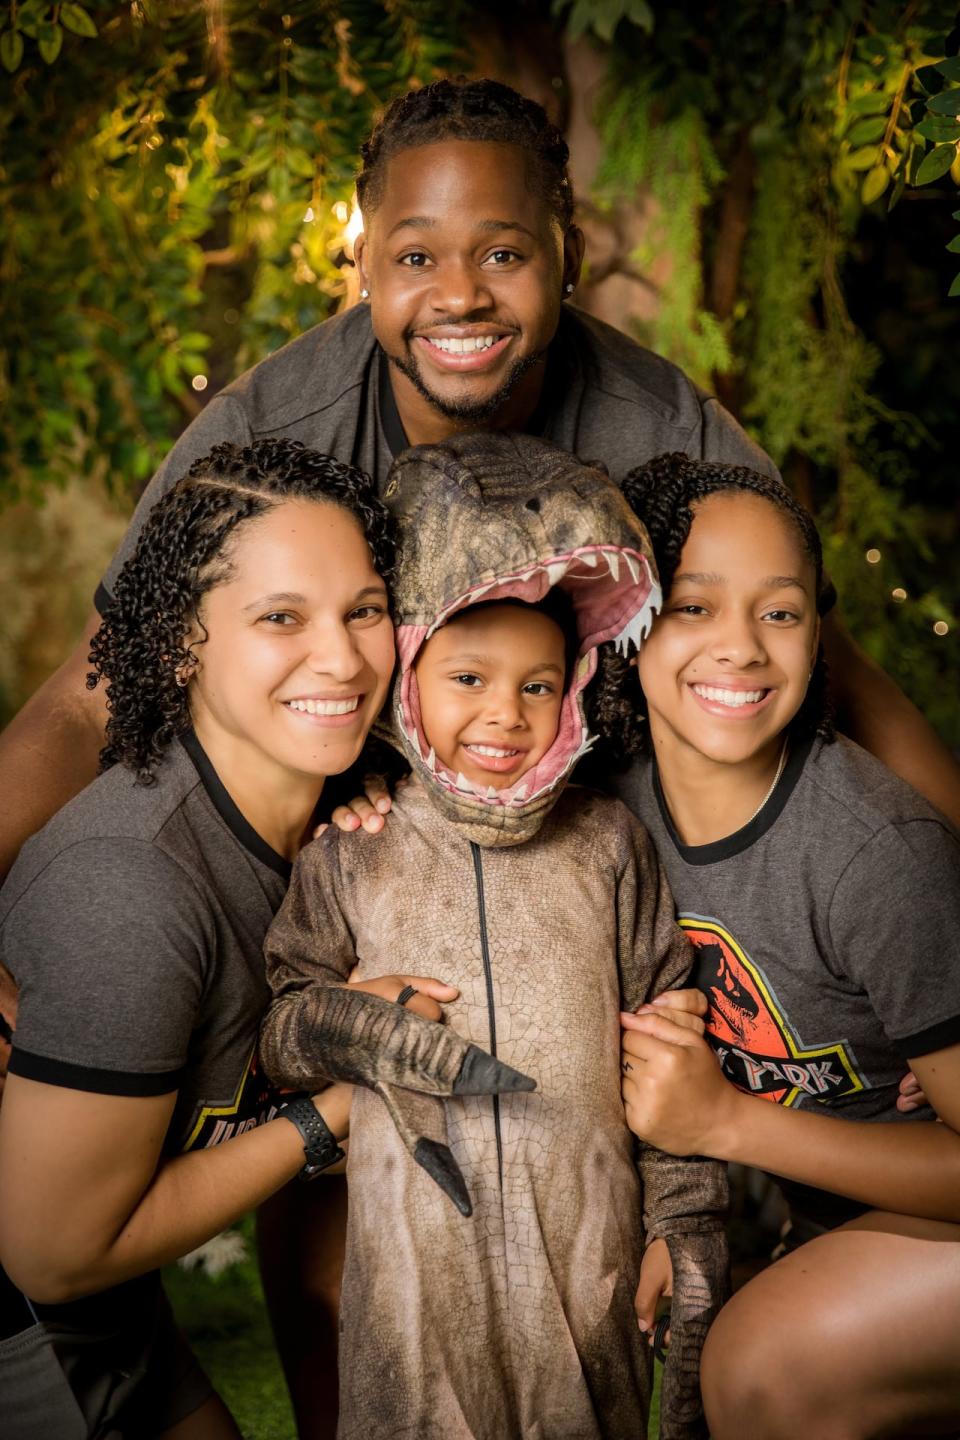 Ahnaleigh Simmonds, right, and her family.